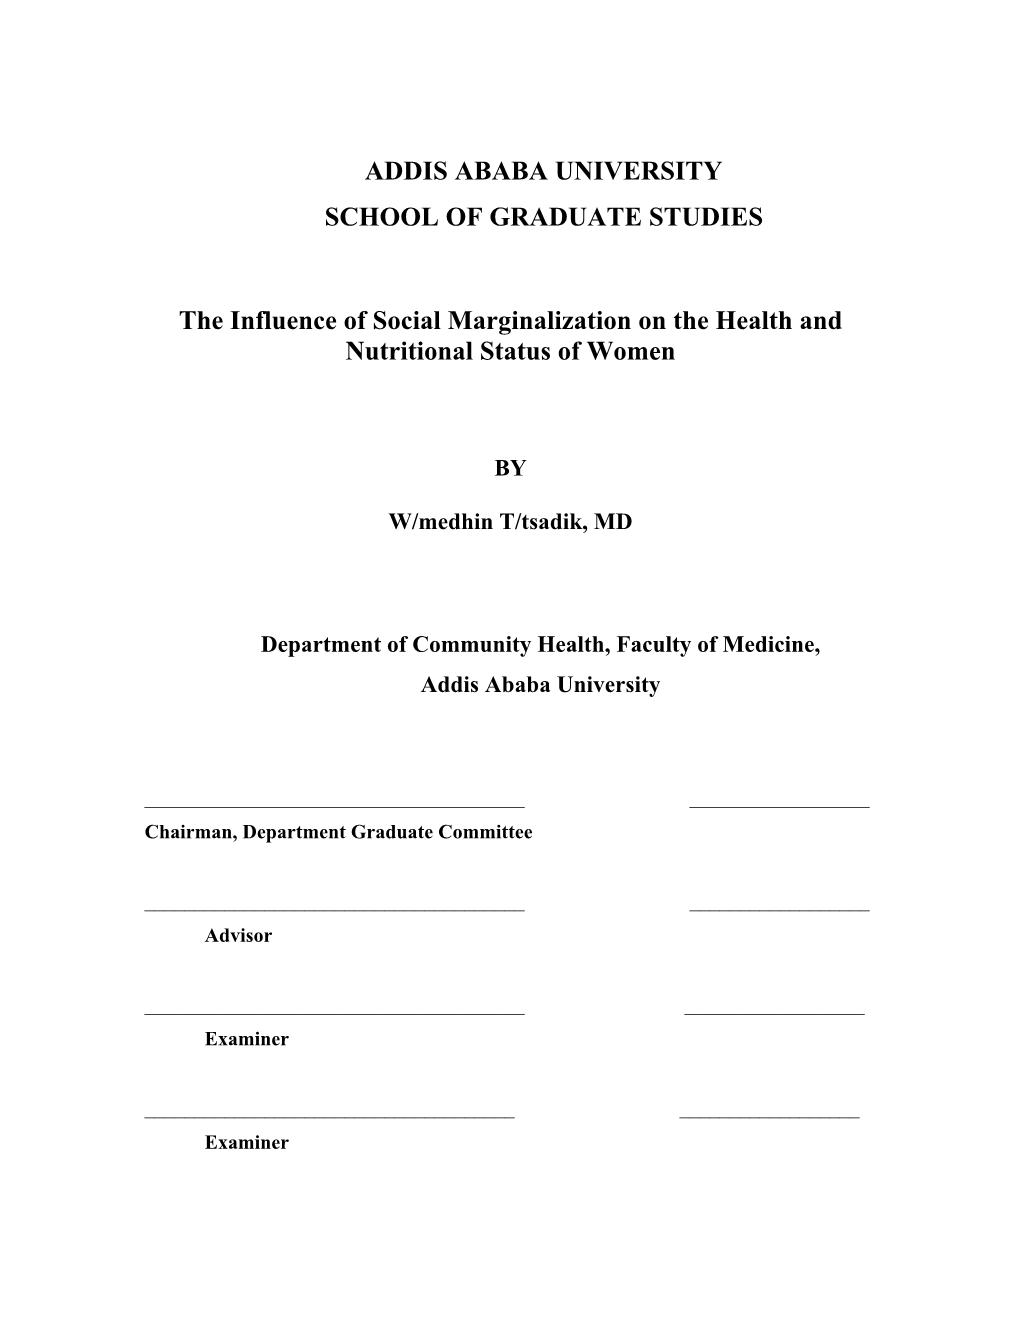 ADDIS ABABA UNIVERSITY SCHOOL of GRADUATE STUDIES the Influence of Social Marginalization on the Health and Nutritional Status